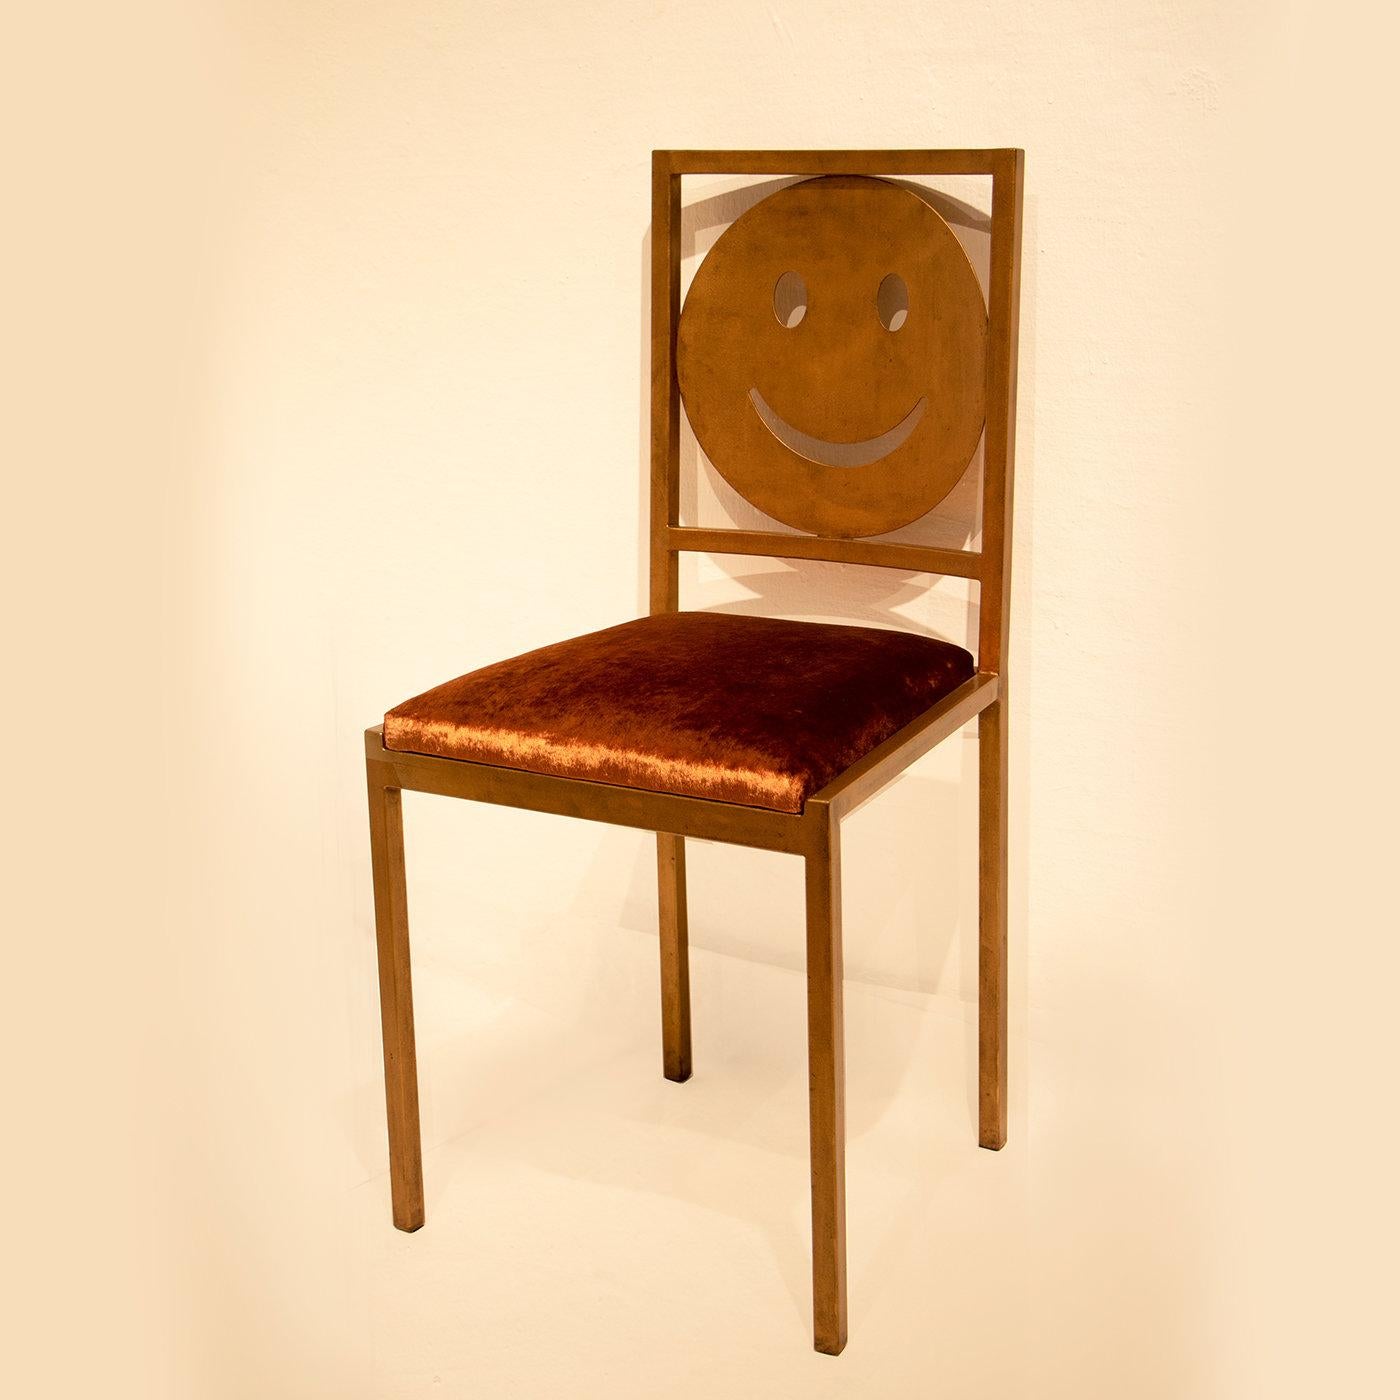 Playing on texture contrast, this chair will put a pop of positivity into any room with its eccentric backrest showcasing a large smiley face emoji. Part of the Pop Collection inspired by popular symbols of contemporary culture, this chair has a